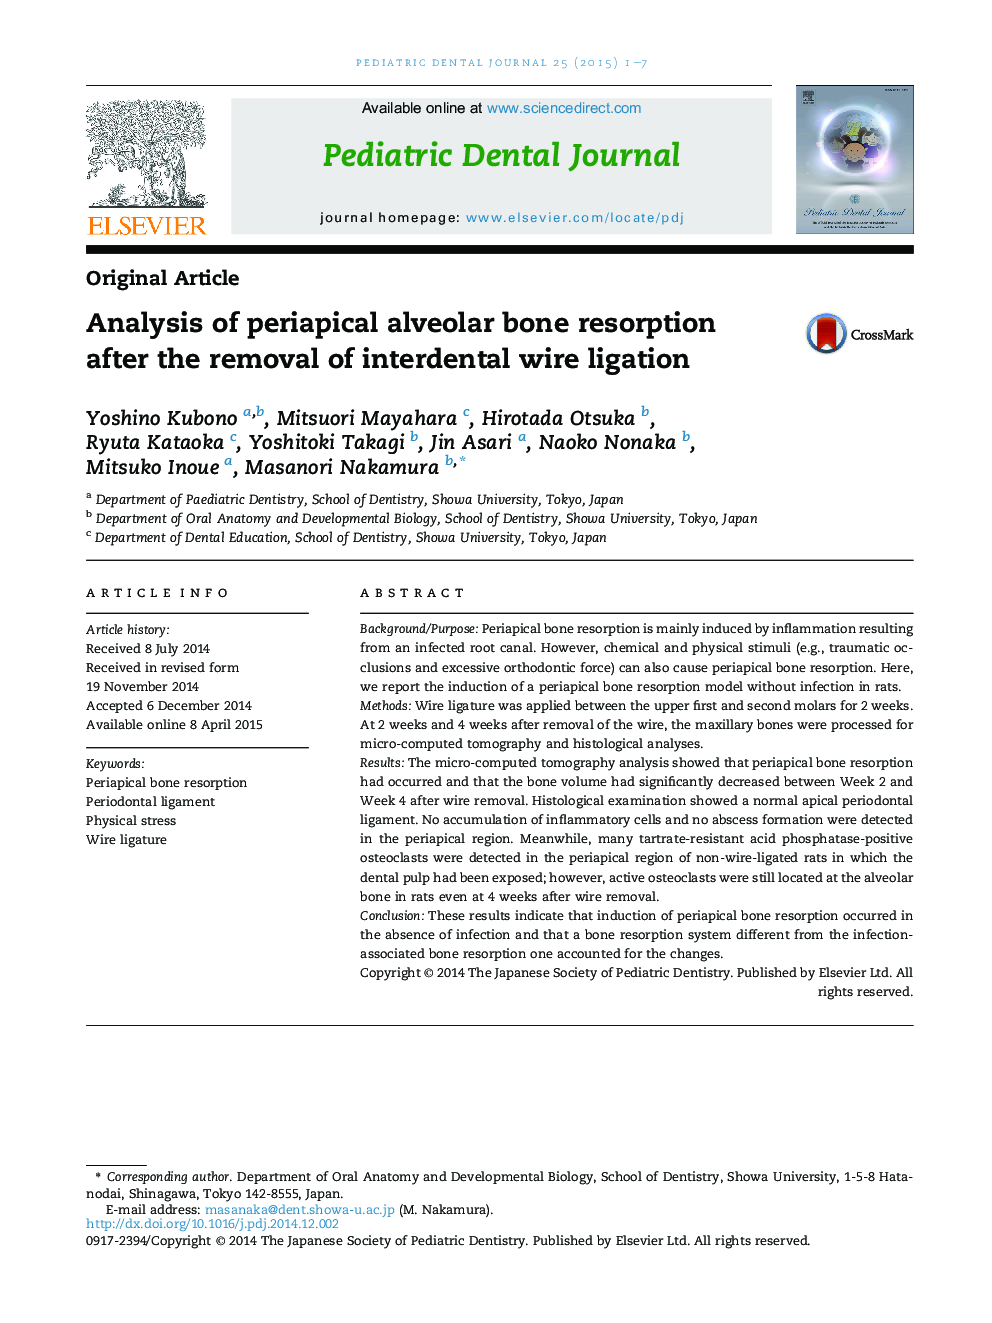 Analysis of periapical alveolar bone resorption after the removal of interdental wire ligation